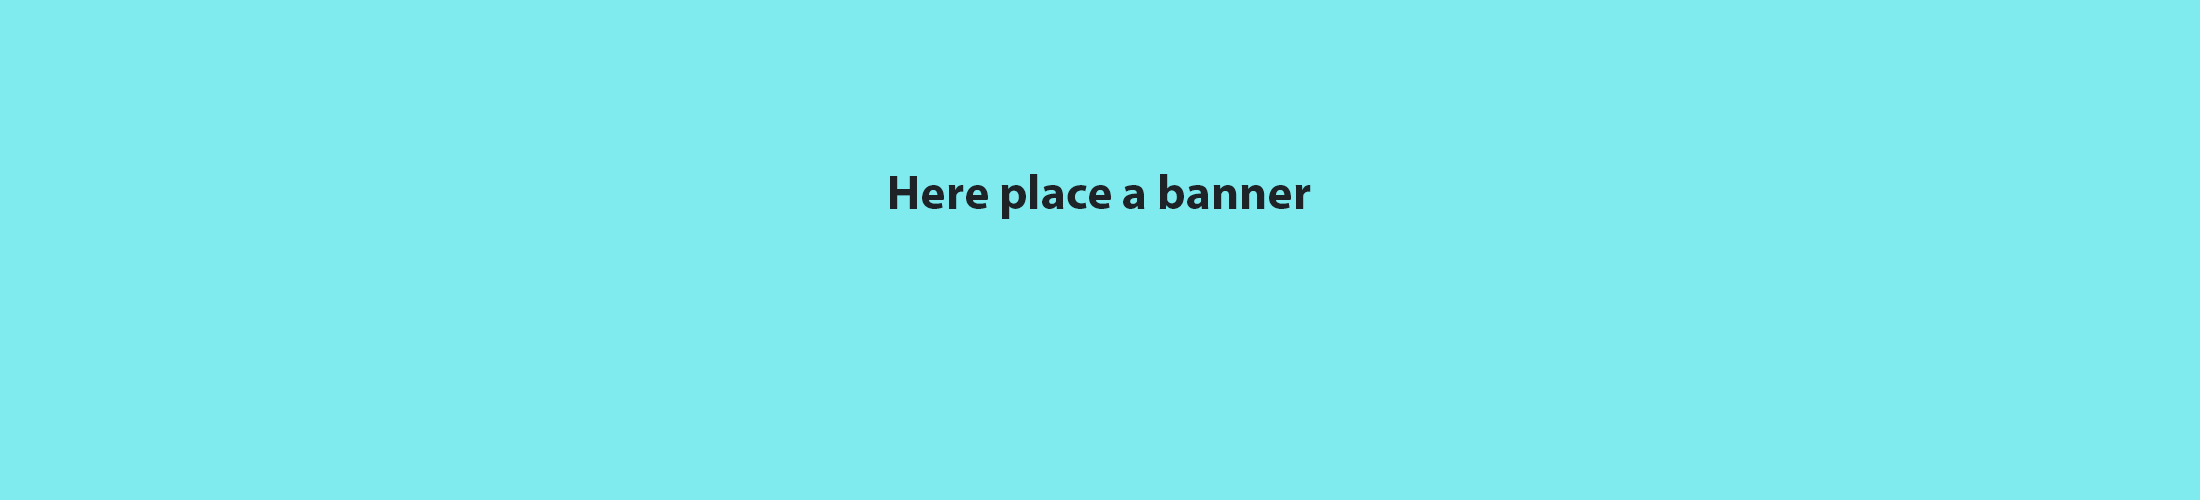 Here place a banner